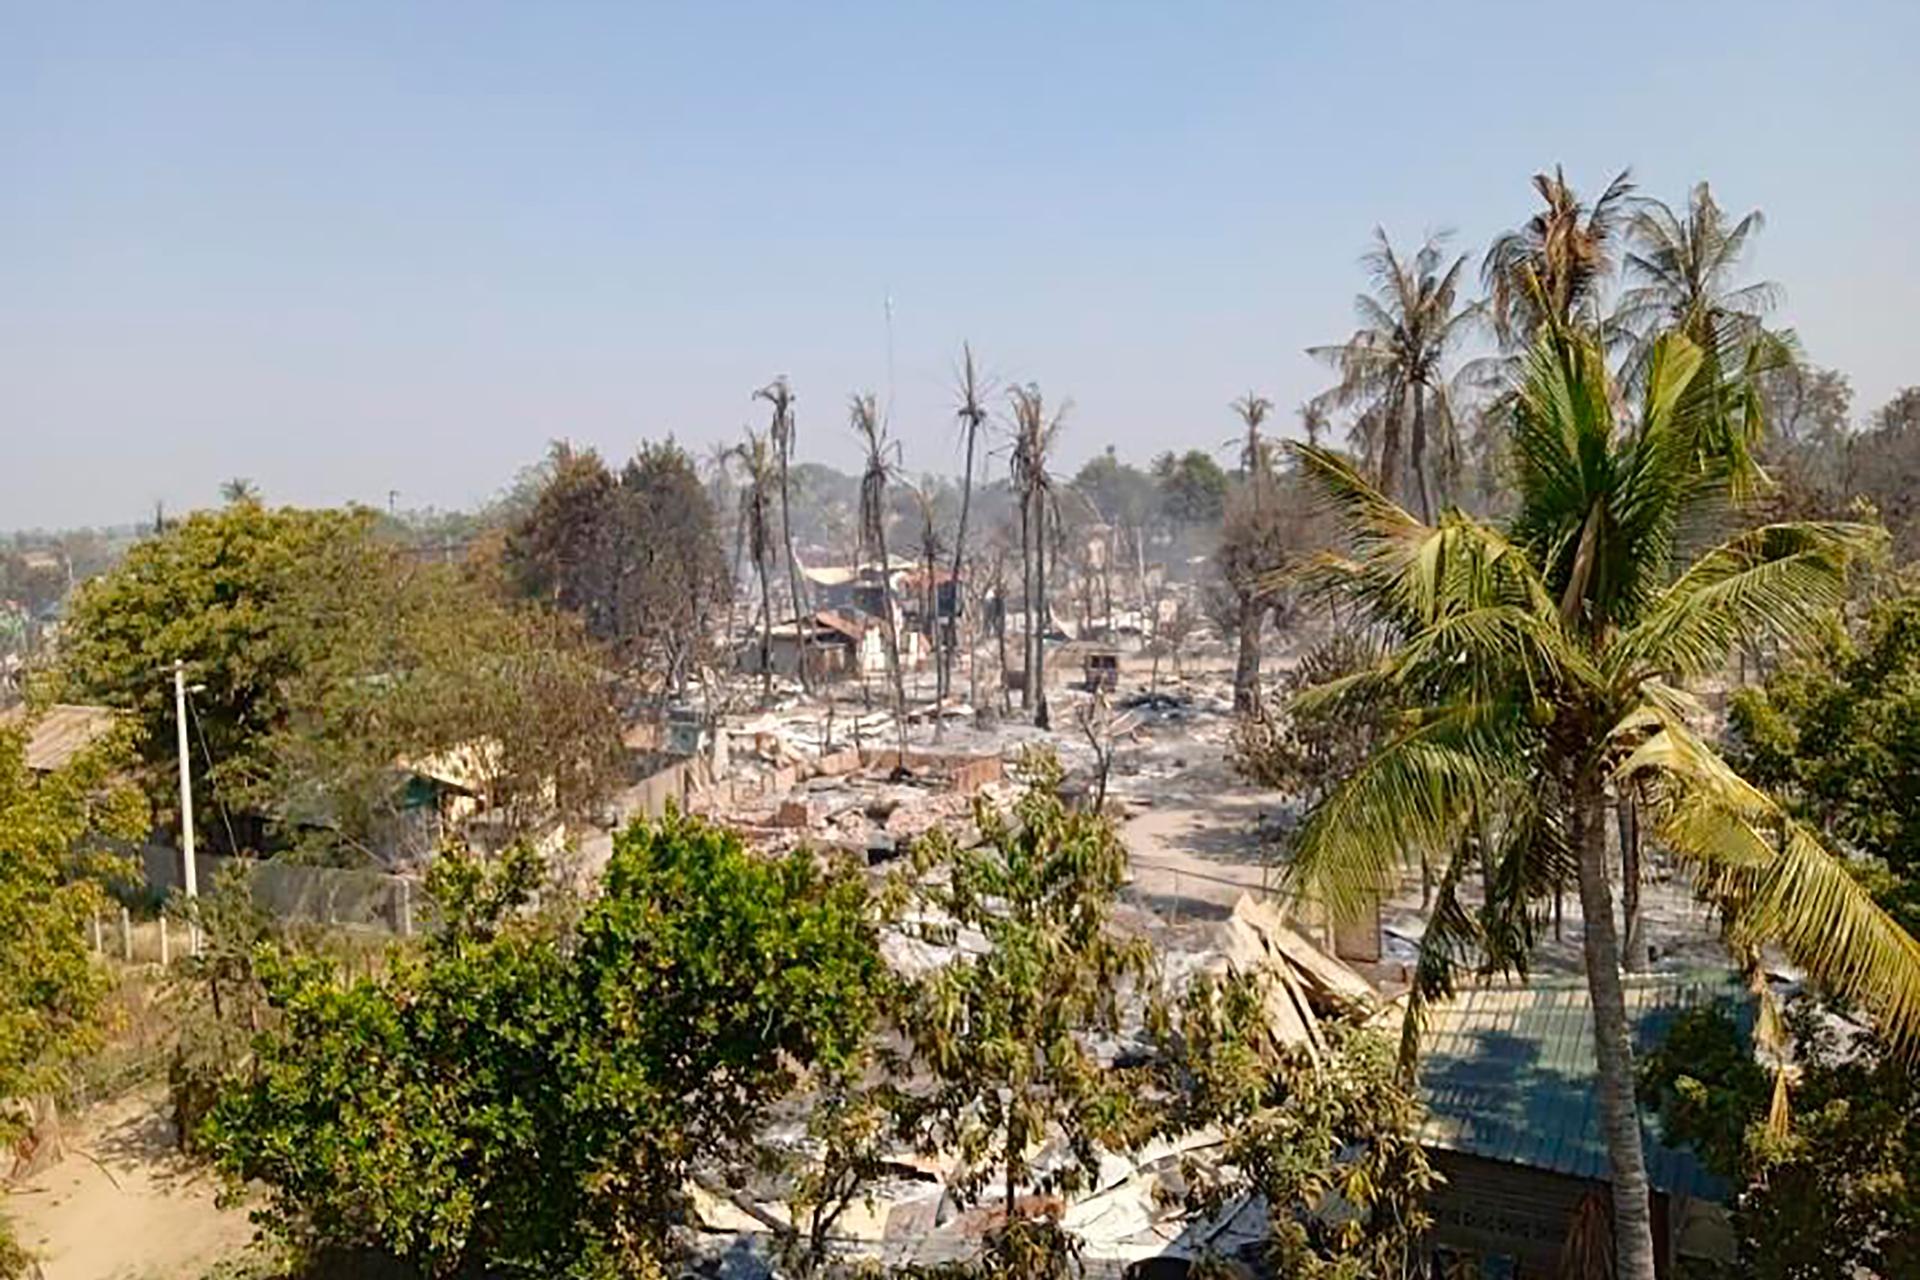 Charred houses sit in ash between the trees in Mwe Tone village of Pale township in the Sagaing region, Myanmar on Feb. 1, 2022. Mwe Tone was one of two villages residents and Myanmar news outlets said were burned down Monday, Jan. 31, 2022, by soldiers t